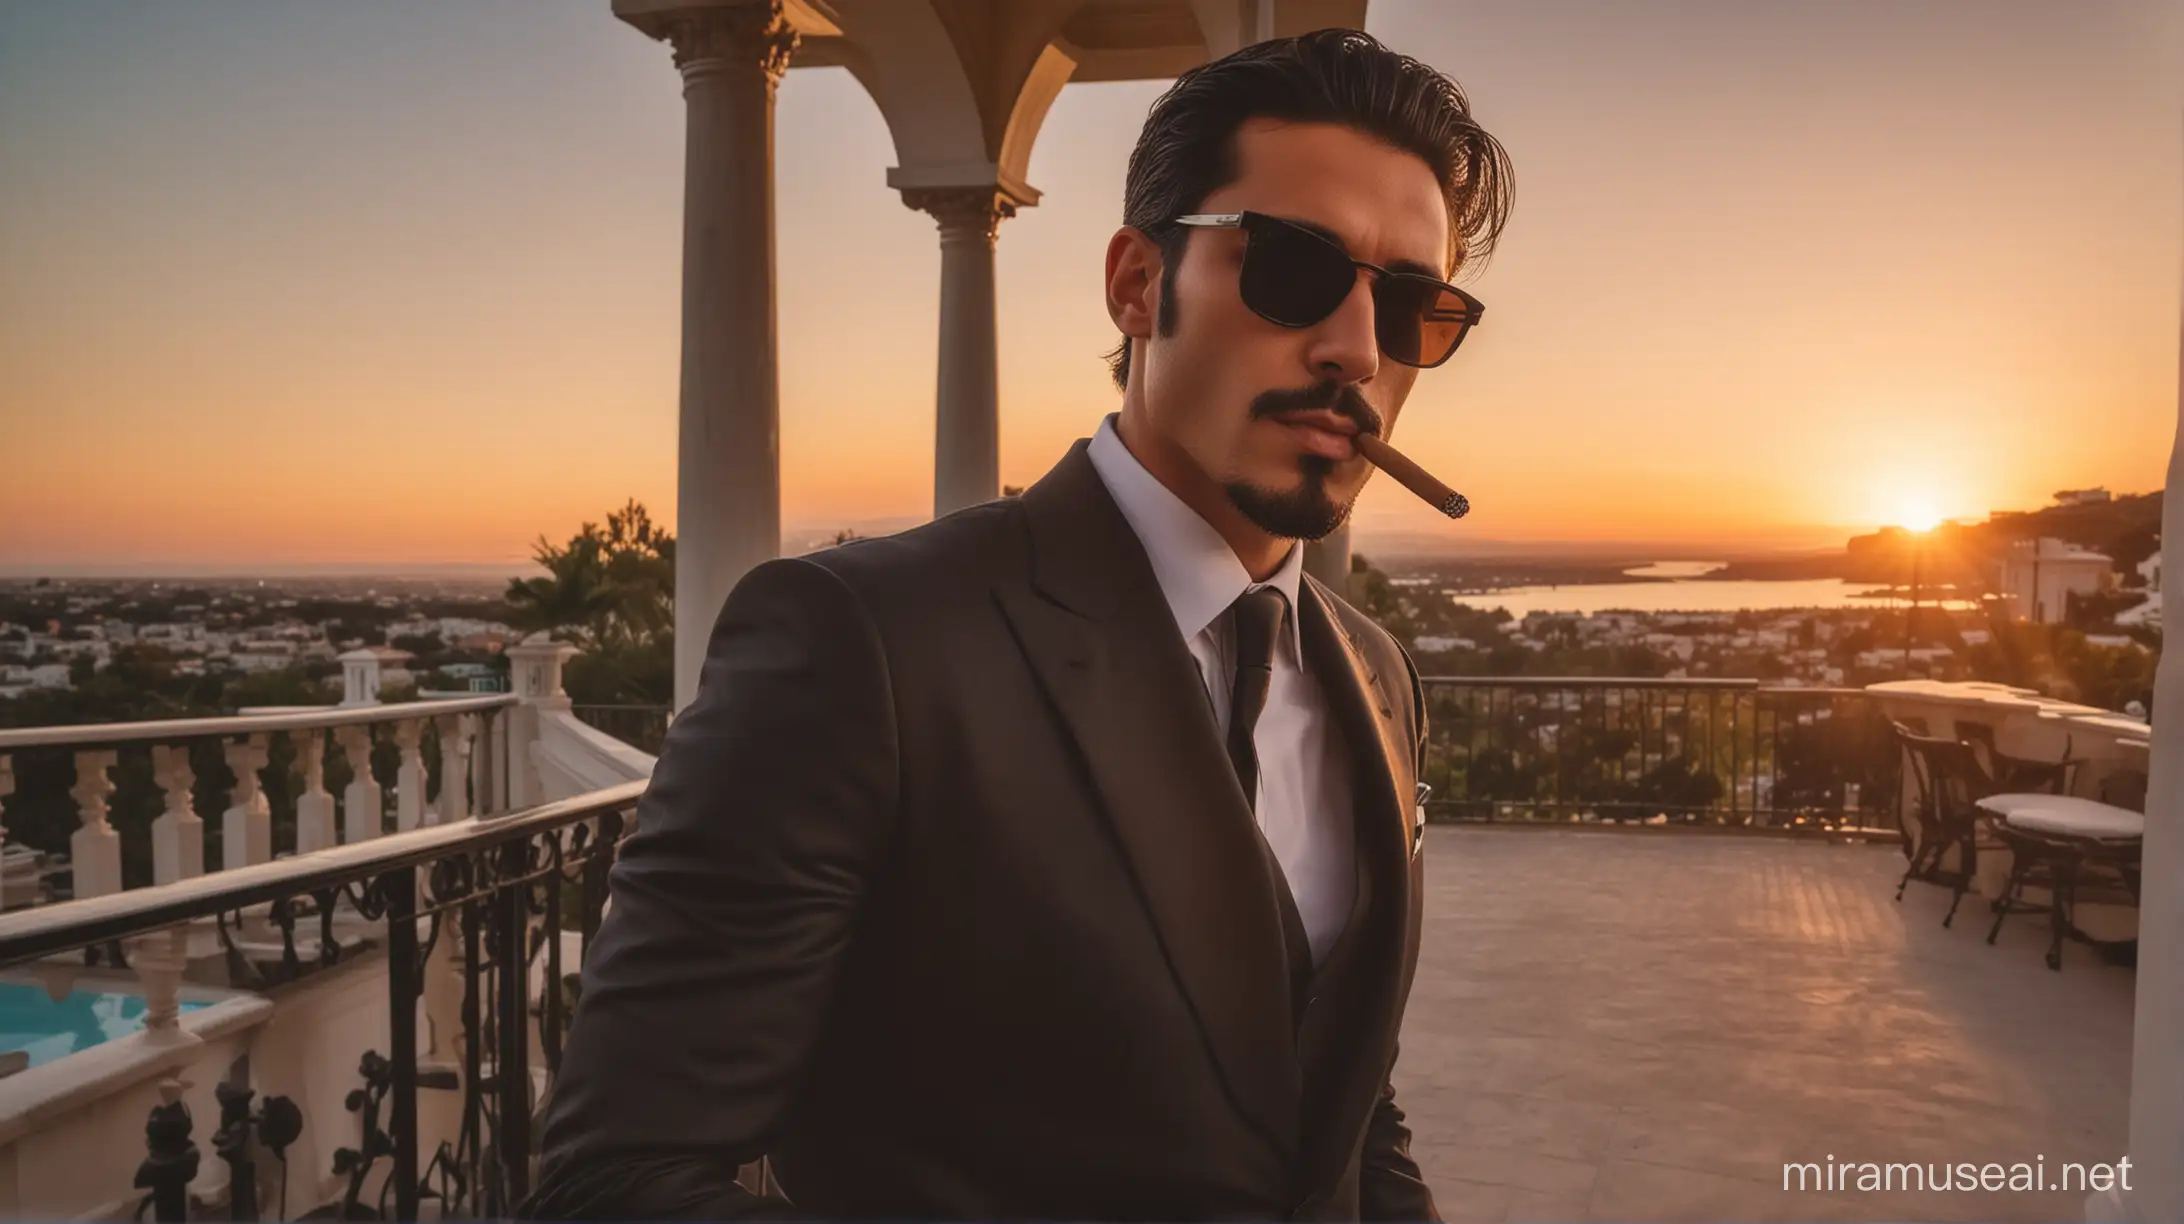 A handsome, wealthy man wearing a suit, black sunglasses, black hair and a light beard, smoking cigar, alone and a sunset view in a mansion.